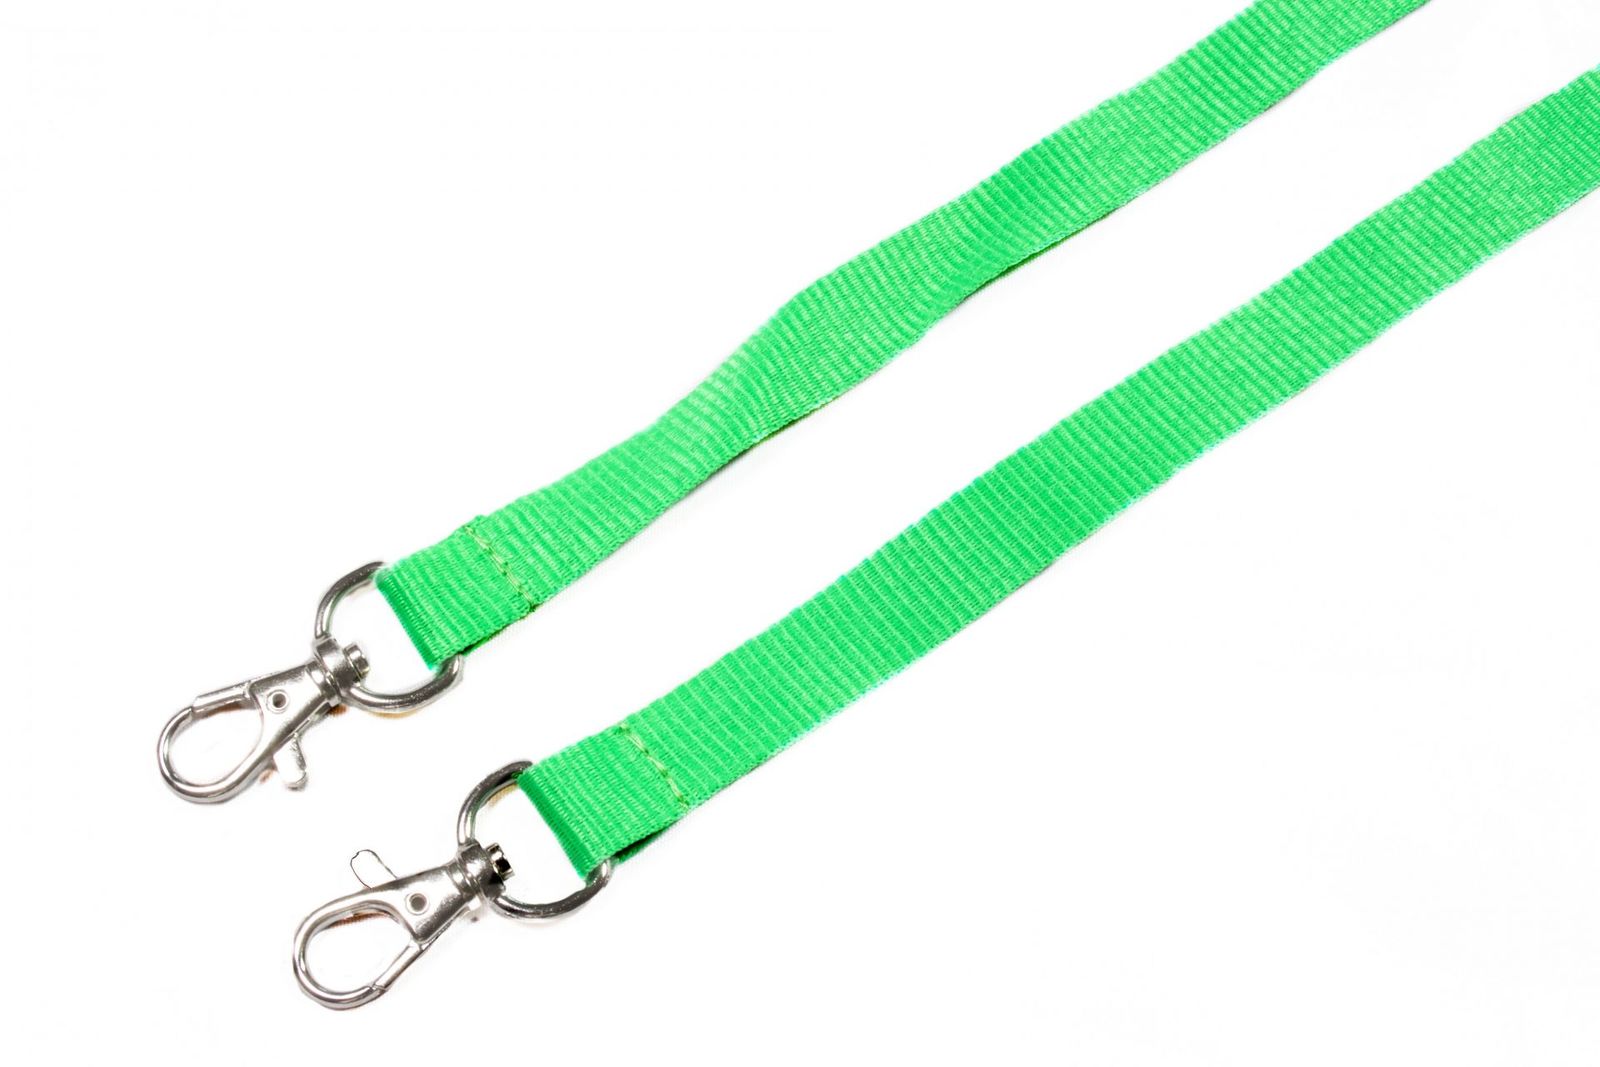 Buy Plain Green Double Ended Lanyards on Lanyards Direct Today!